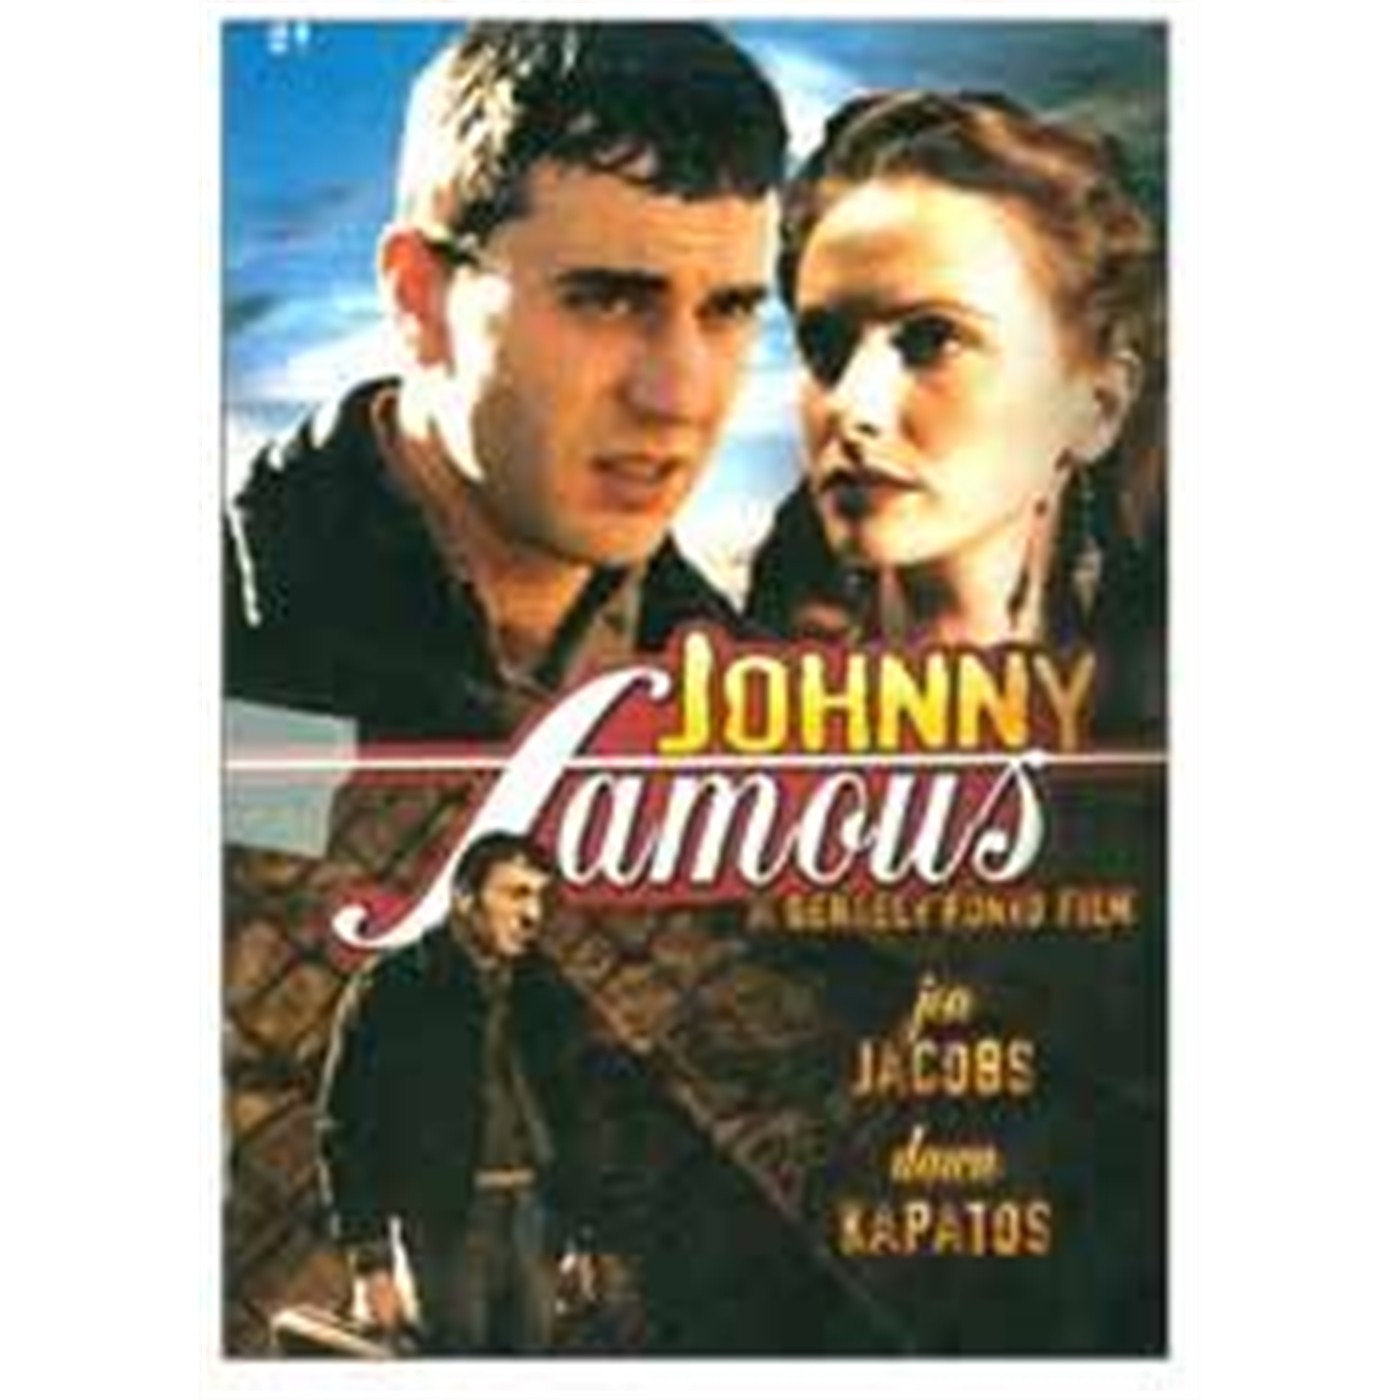 Johnny Famous DVD